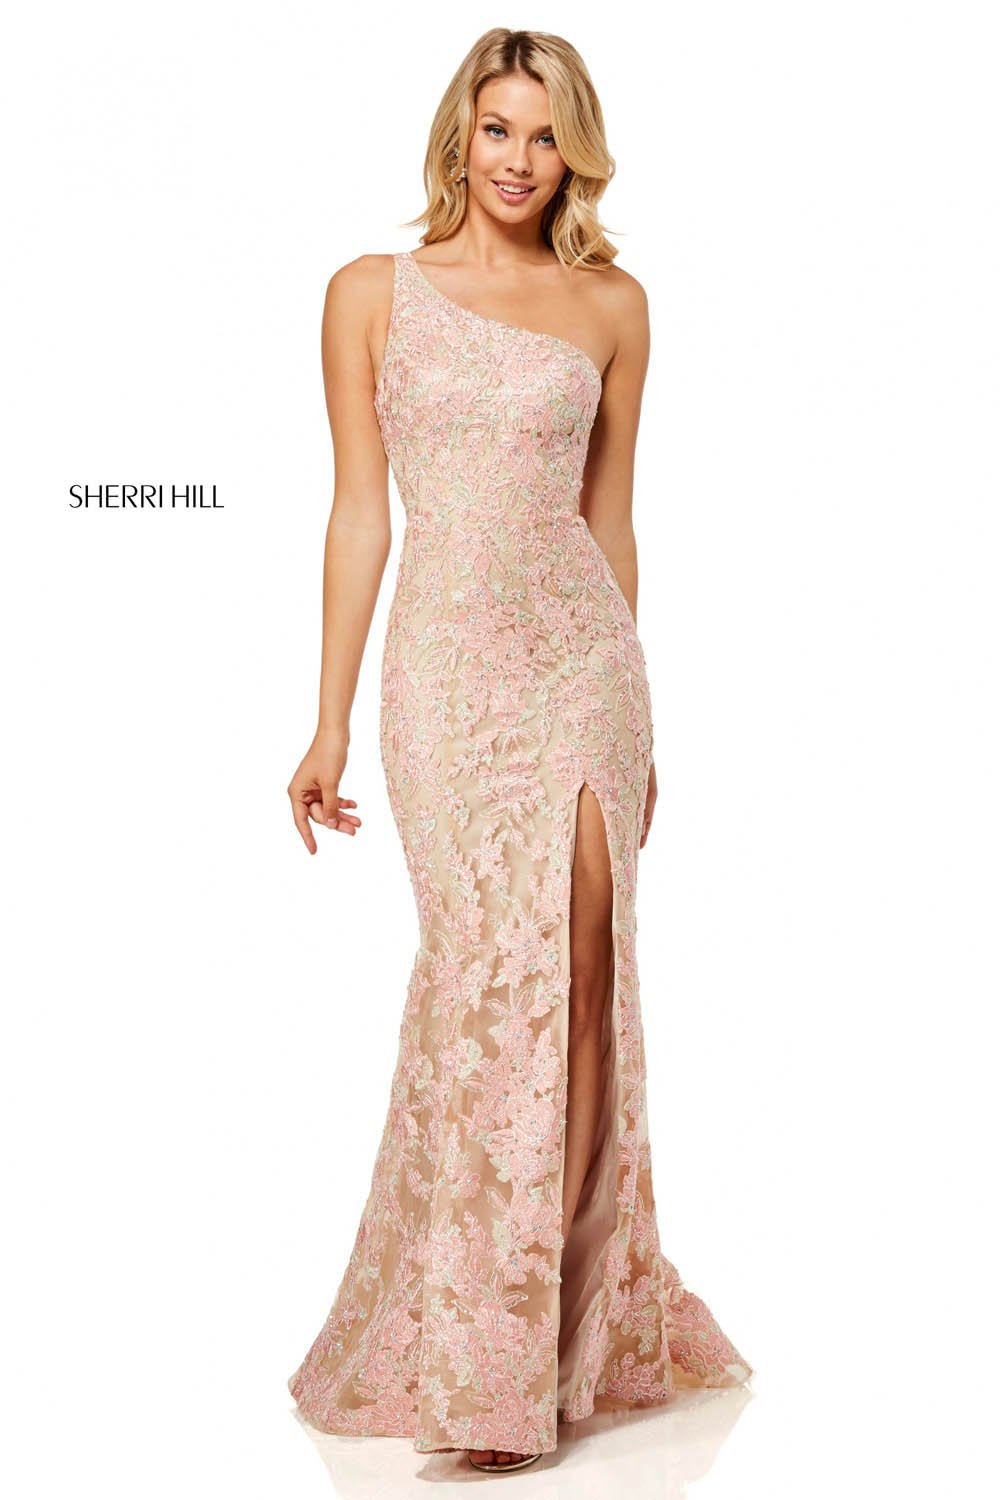 Sherri Hill 52654 dress images in these colors: Nude Peach.